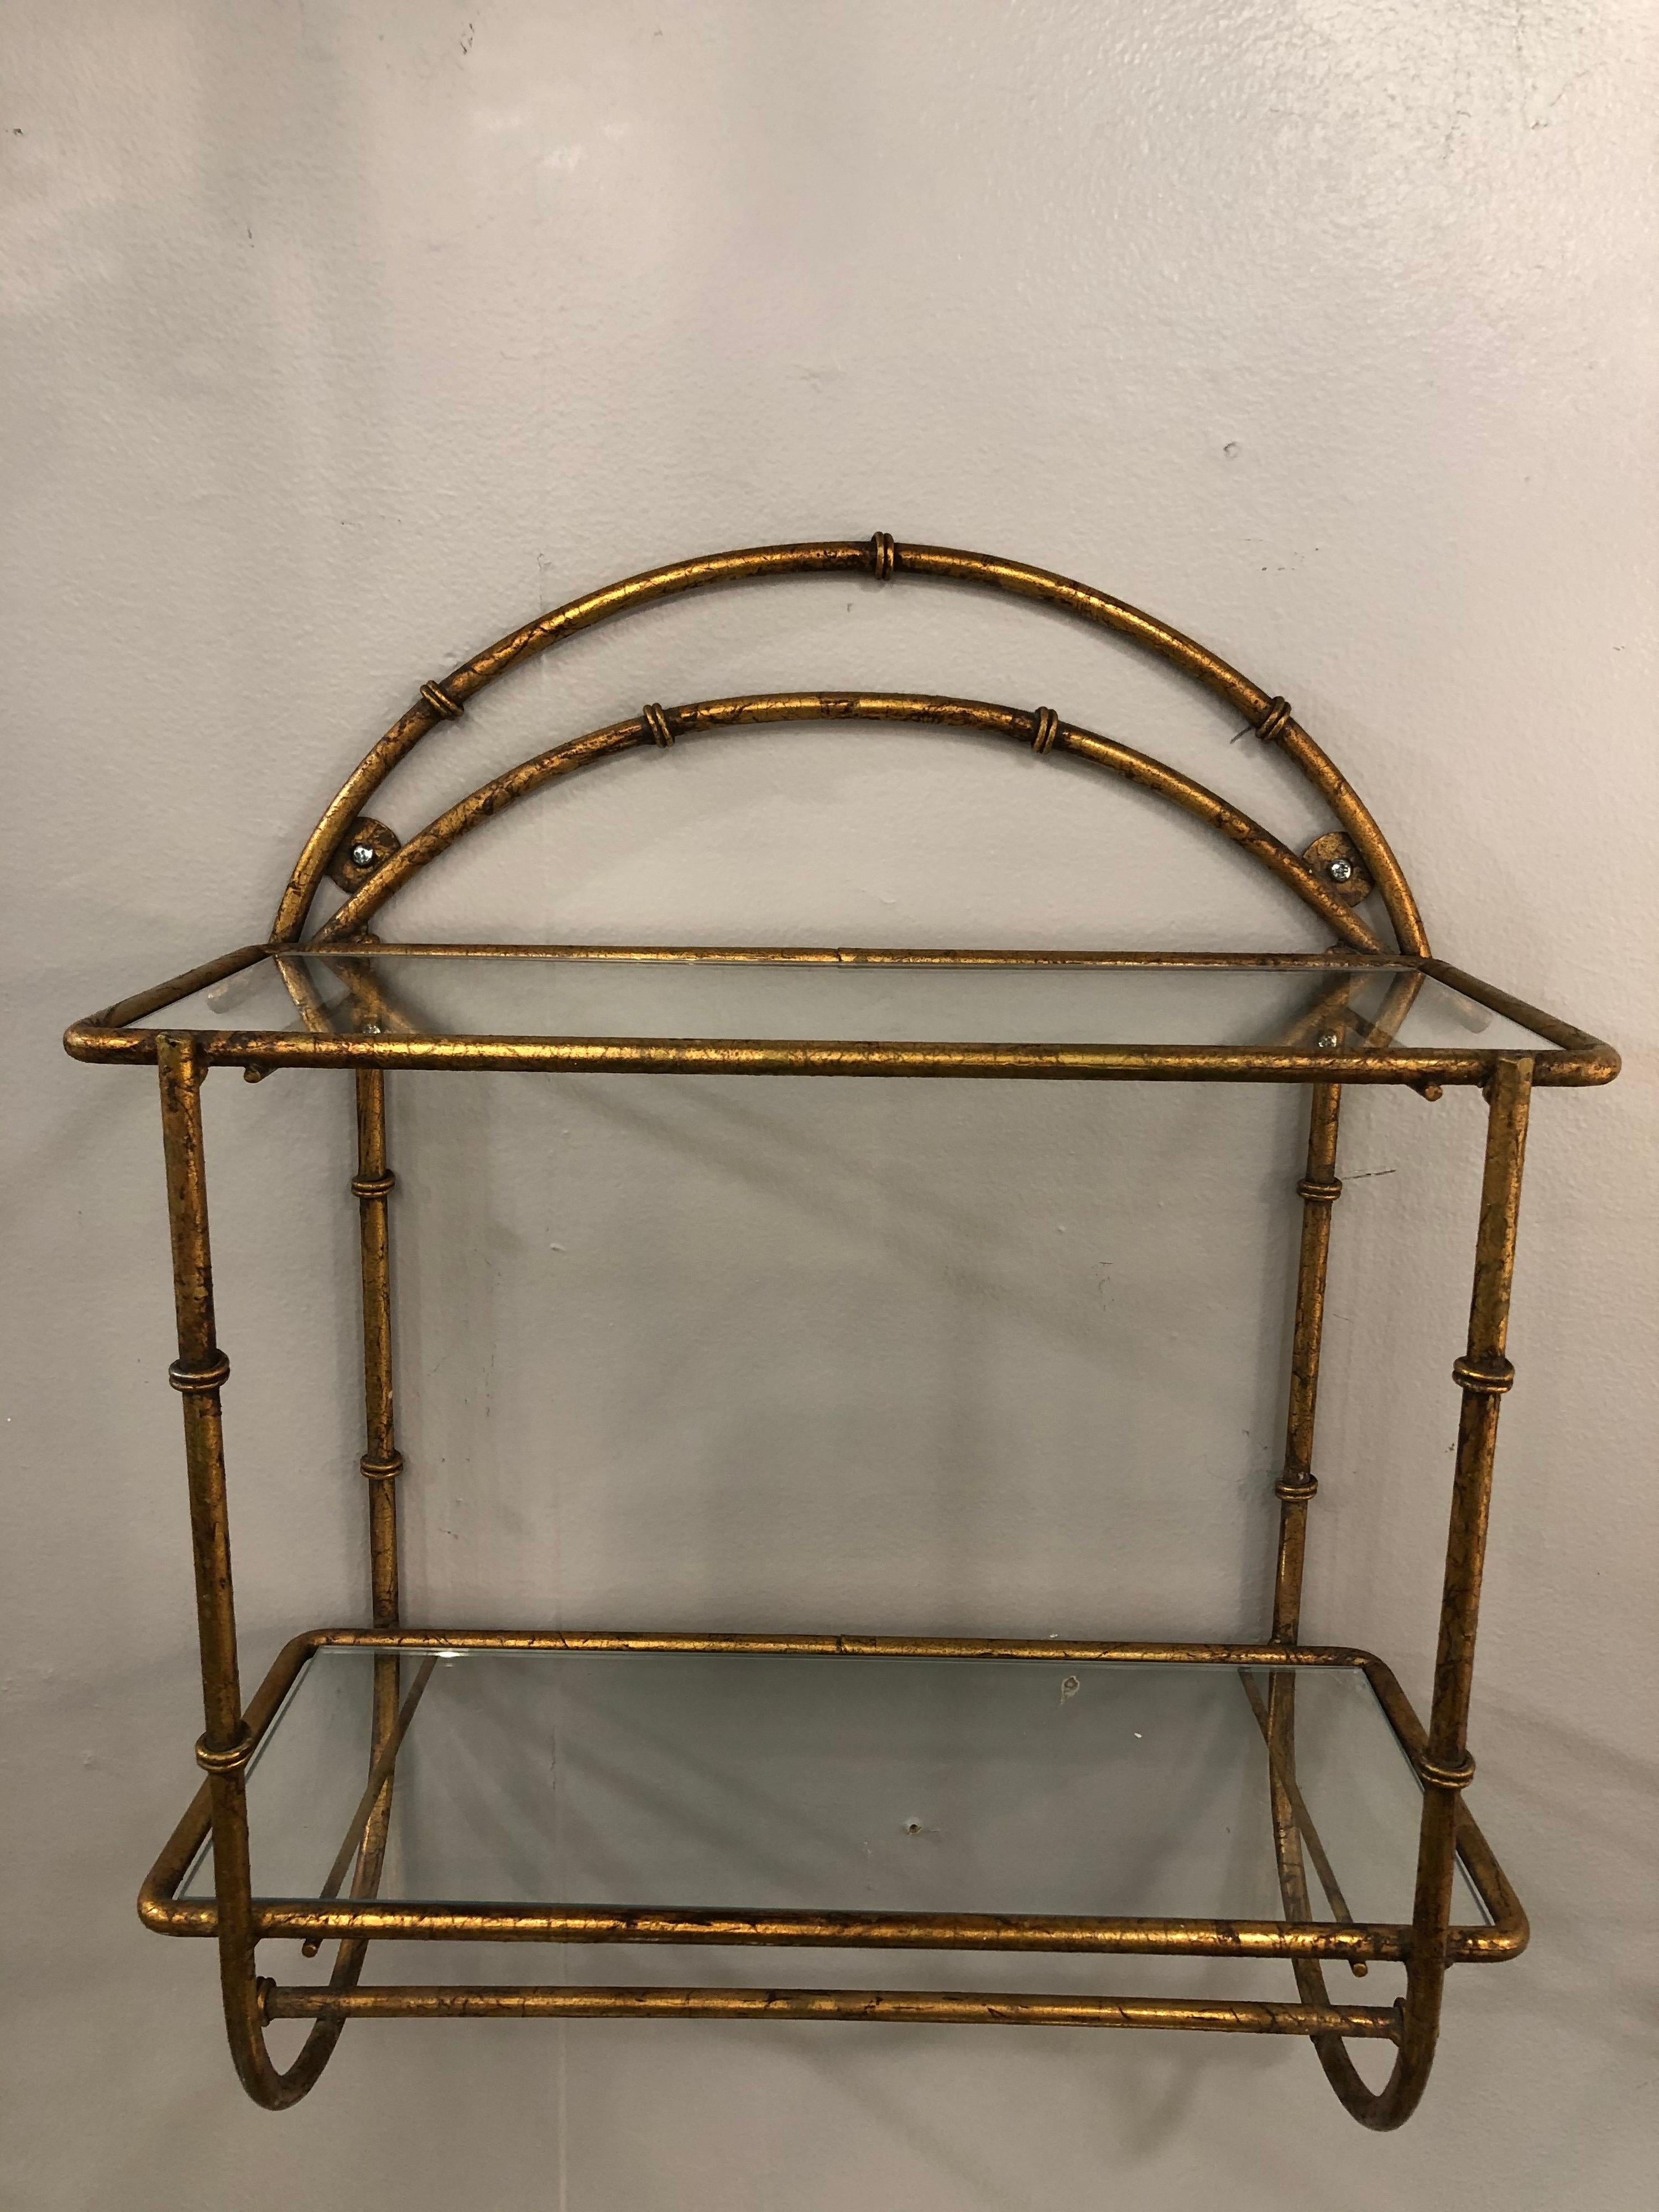 Gilt faux bamboo two-tier wall shelf with new glass shelves. Perfect for bathroom, has towel bar below shelves.